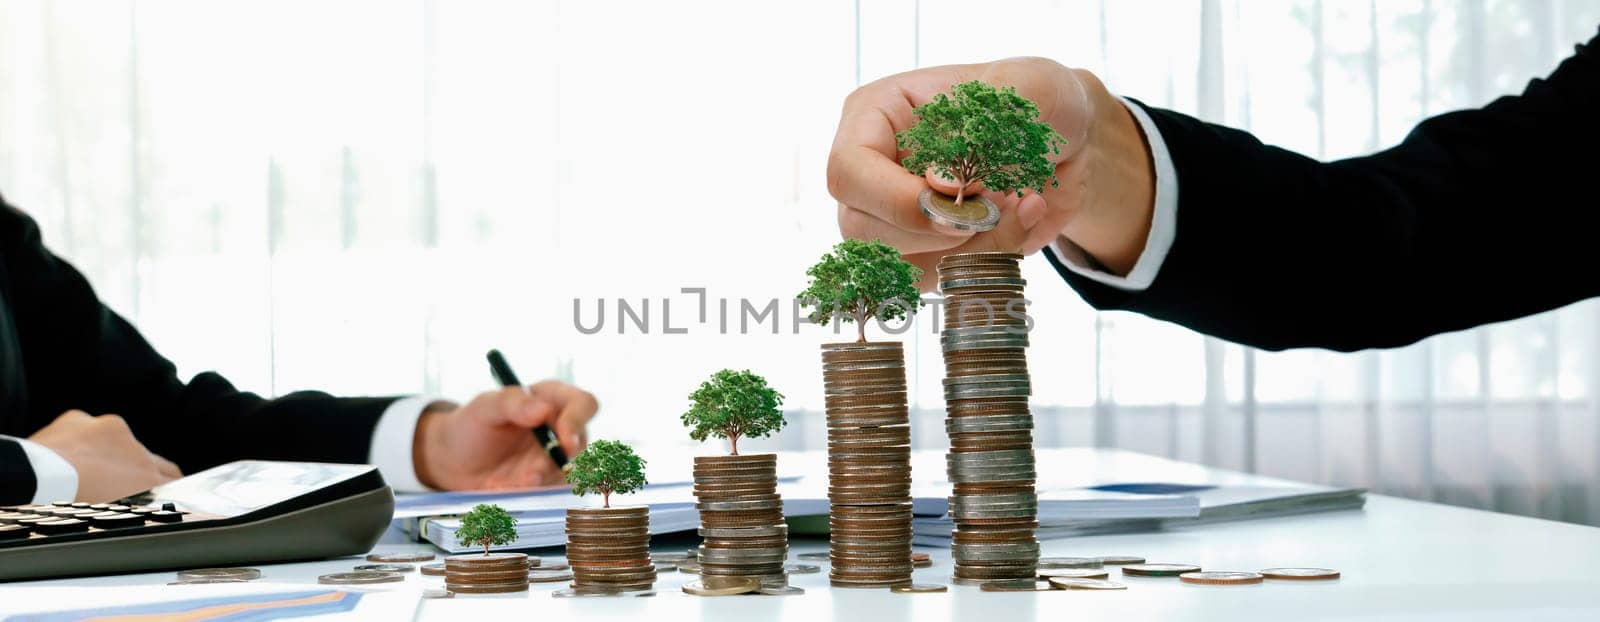 Growth coin stack with tree on top symbolize green business investment. Shrewd by biancoblue